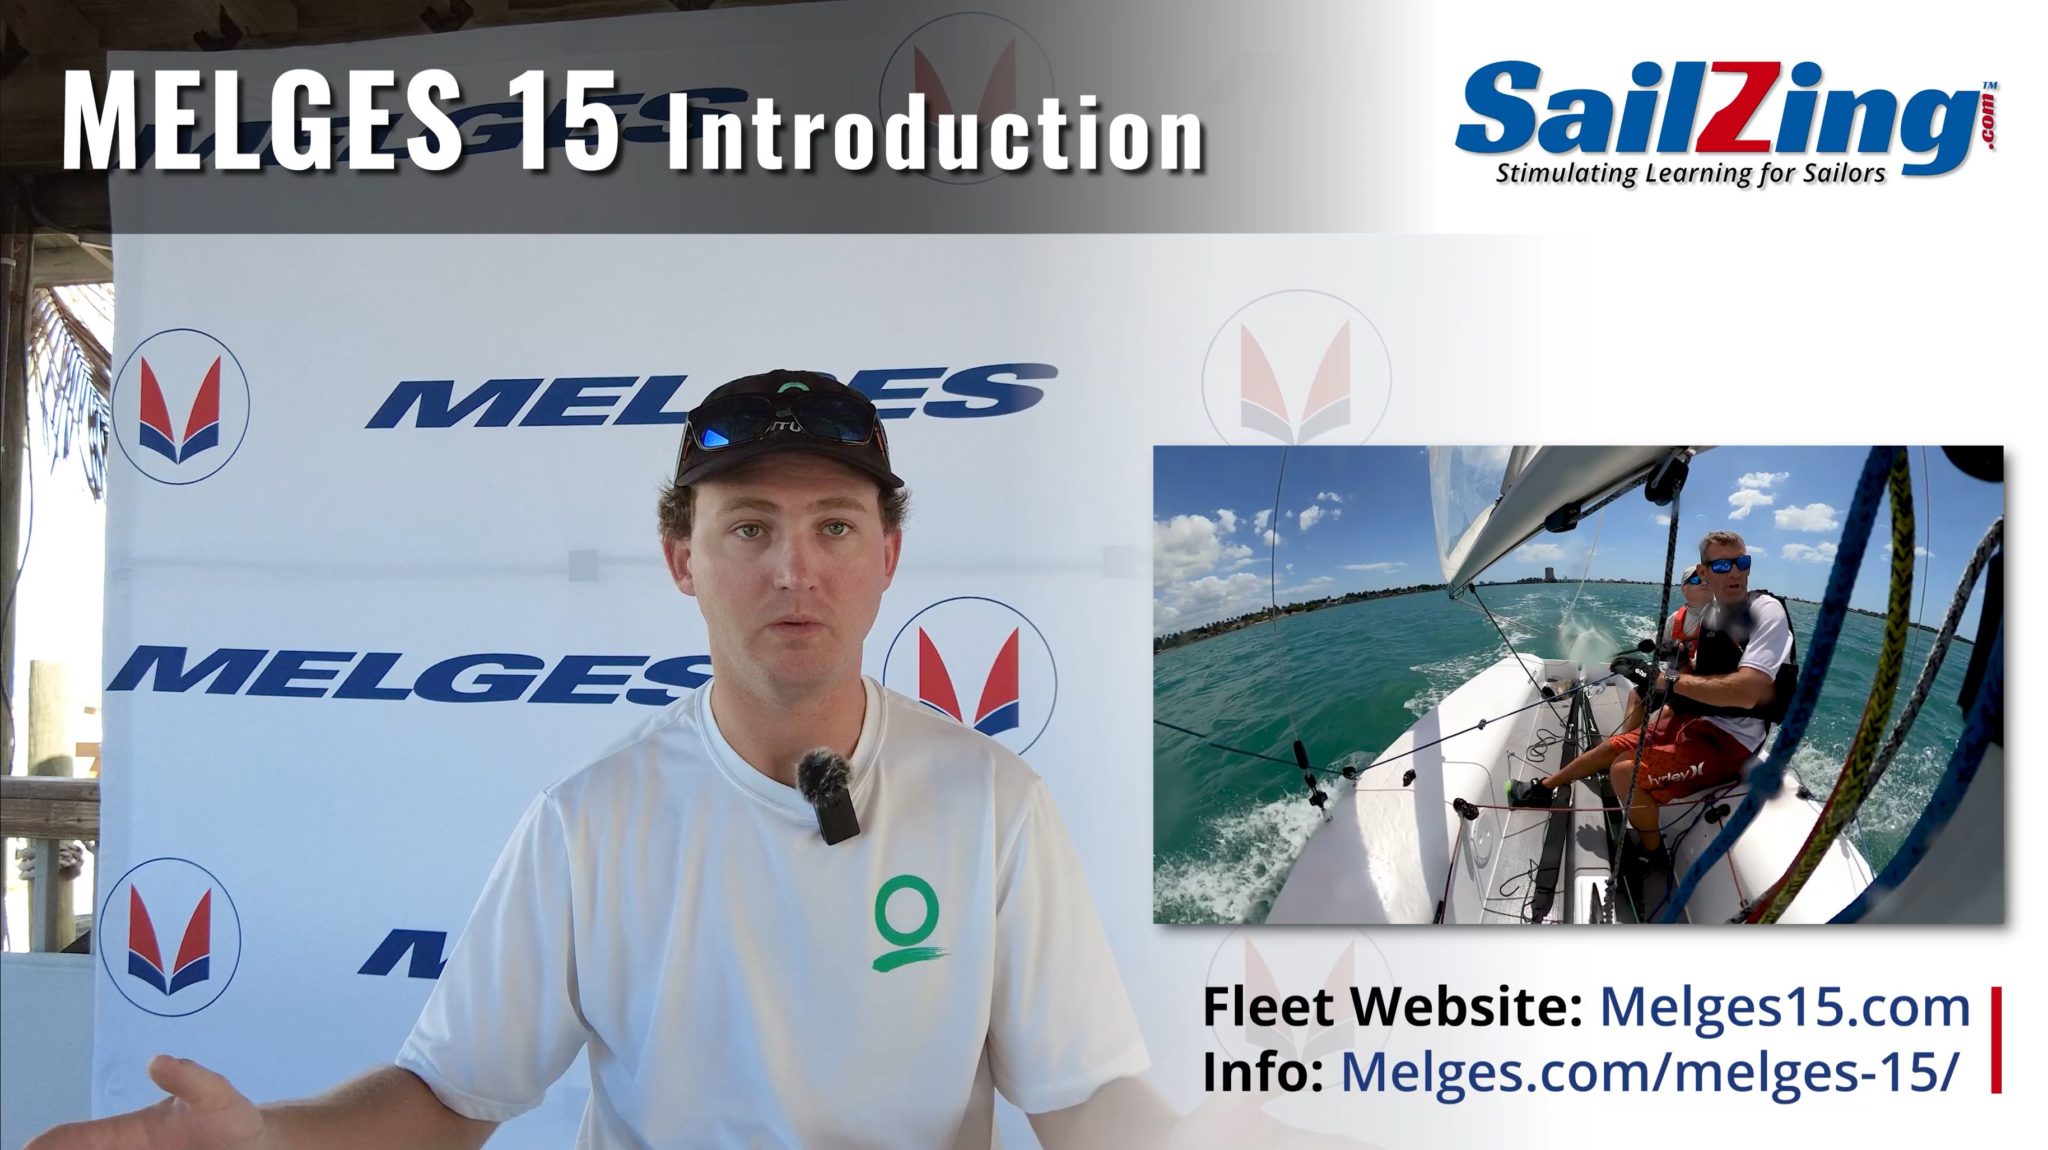 Melges 15 introduction with Eddie Cox